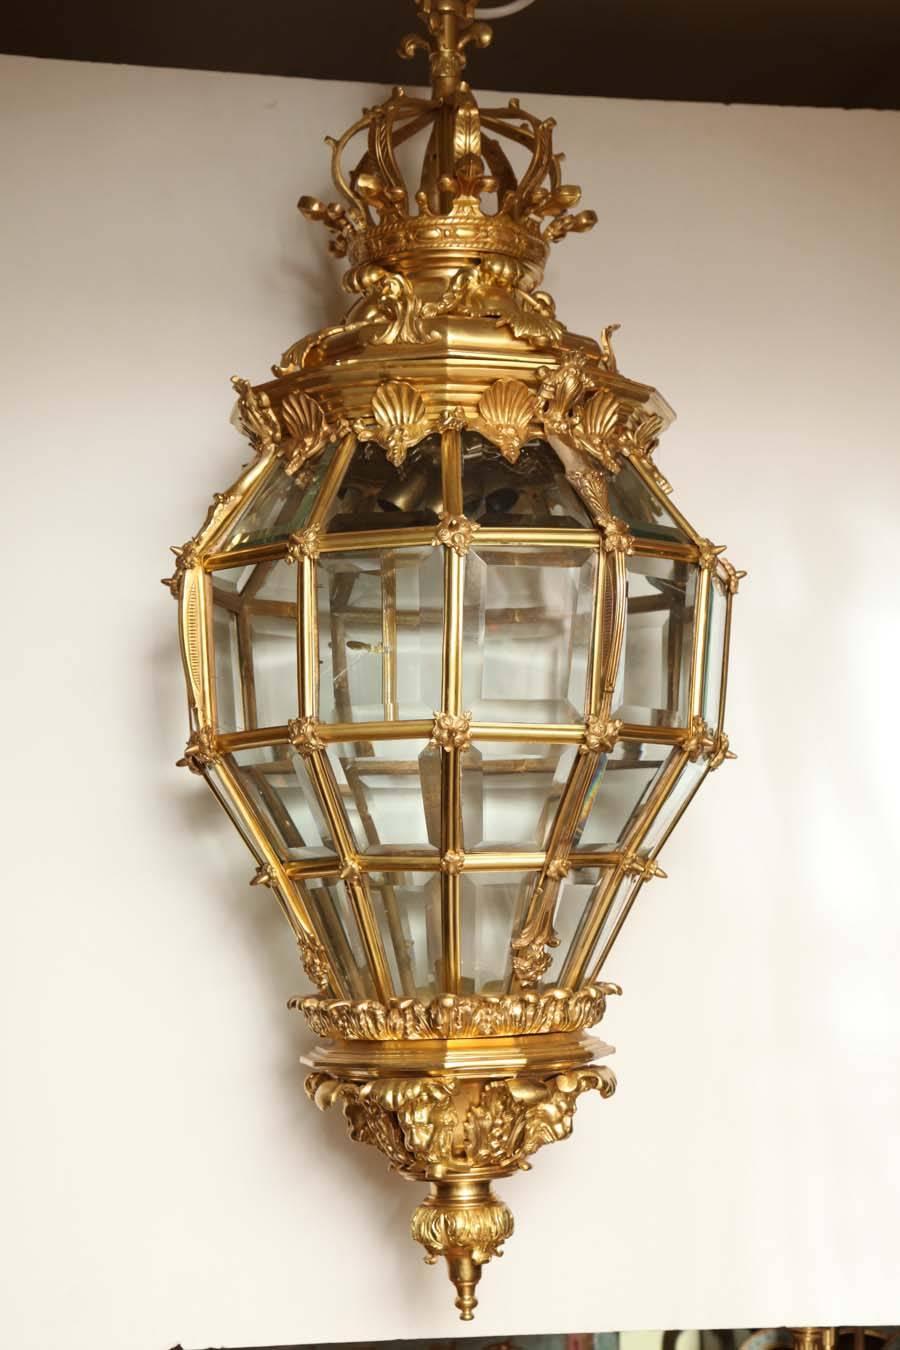 A fine French gilt bronze dodecagonal hall lantern with bevelled glass, shell and acanthus mounts.